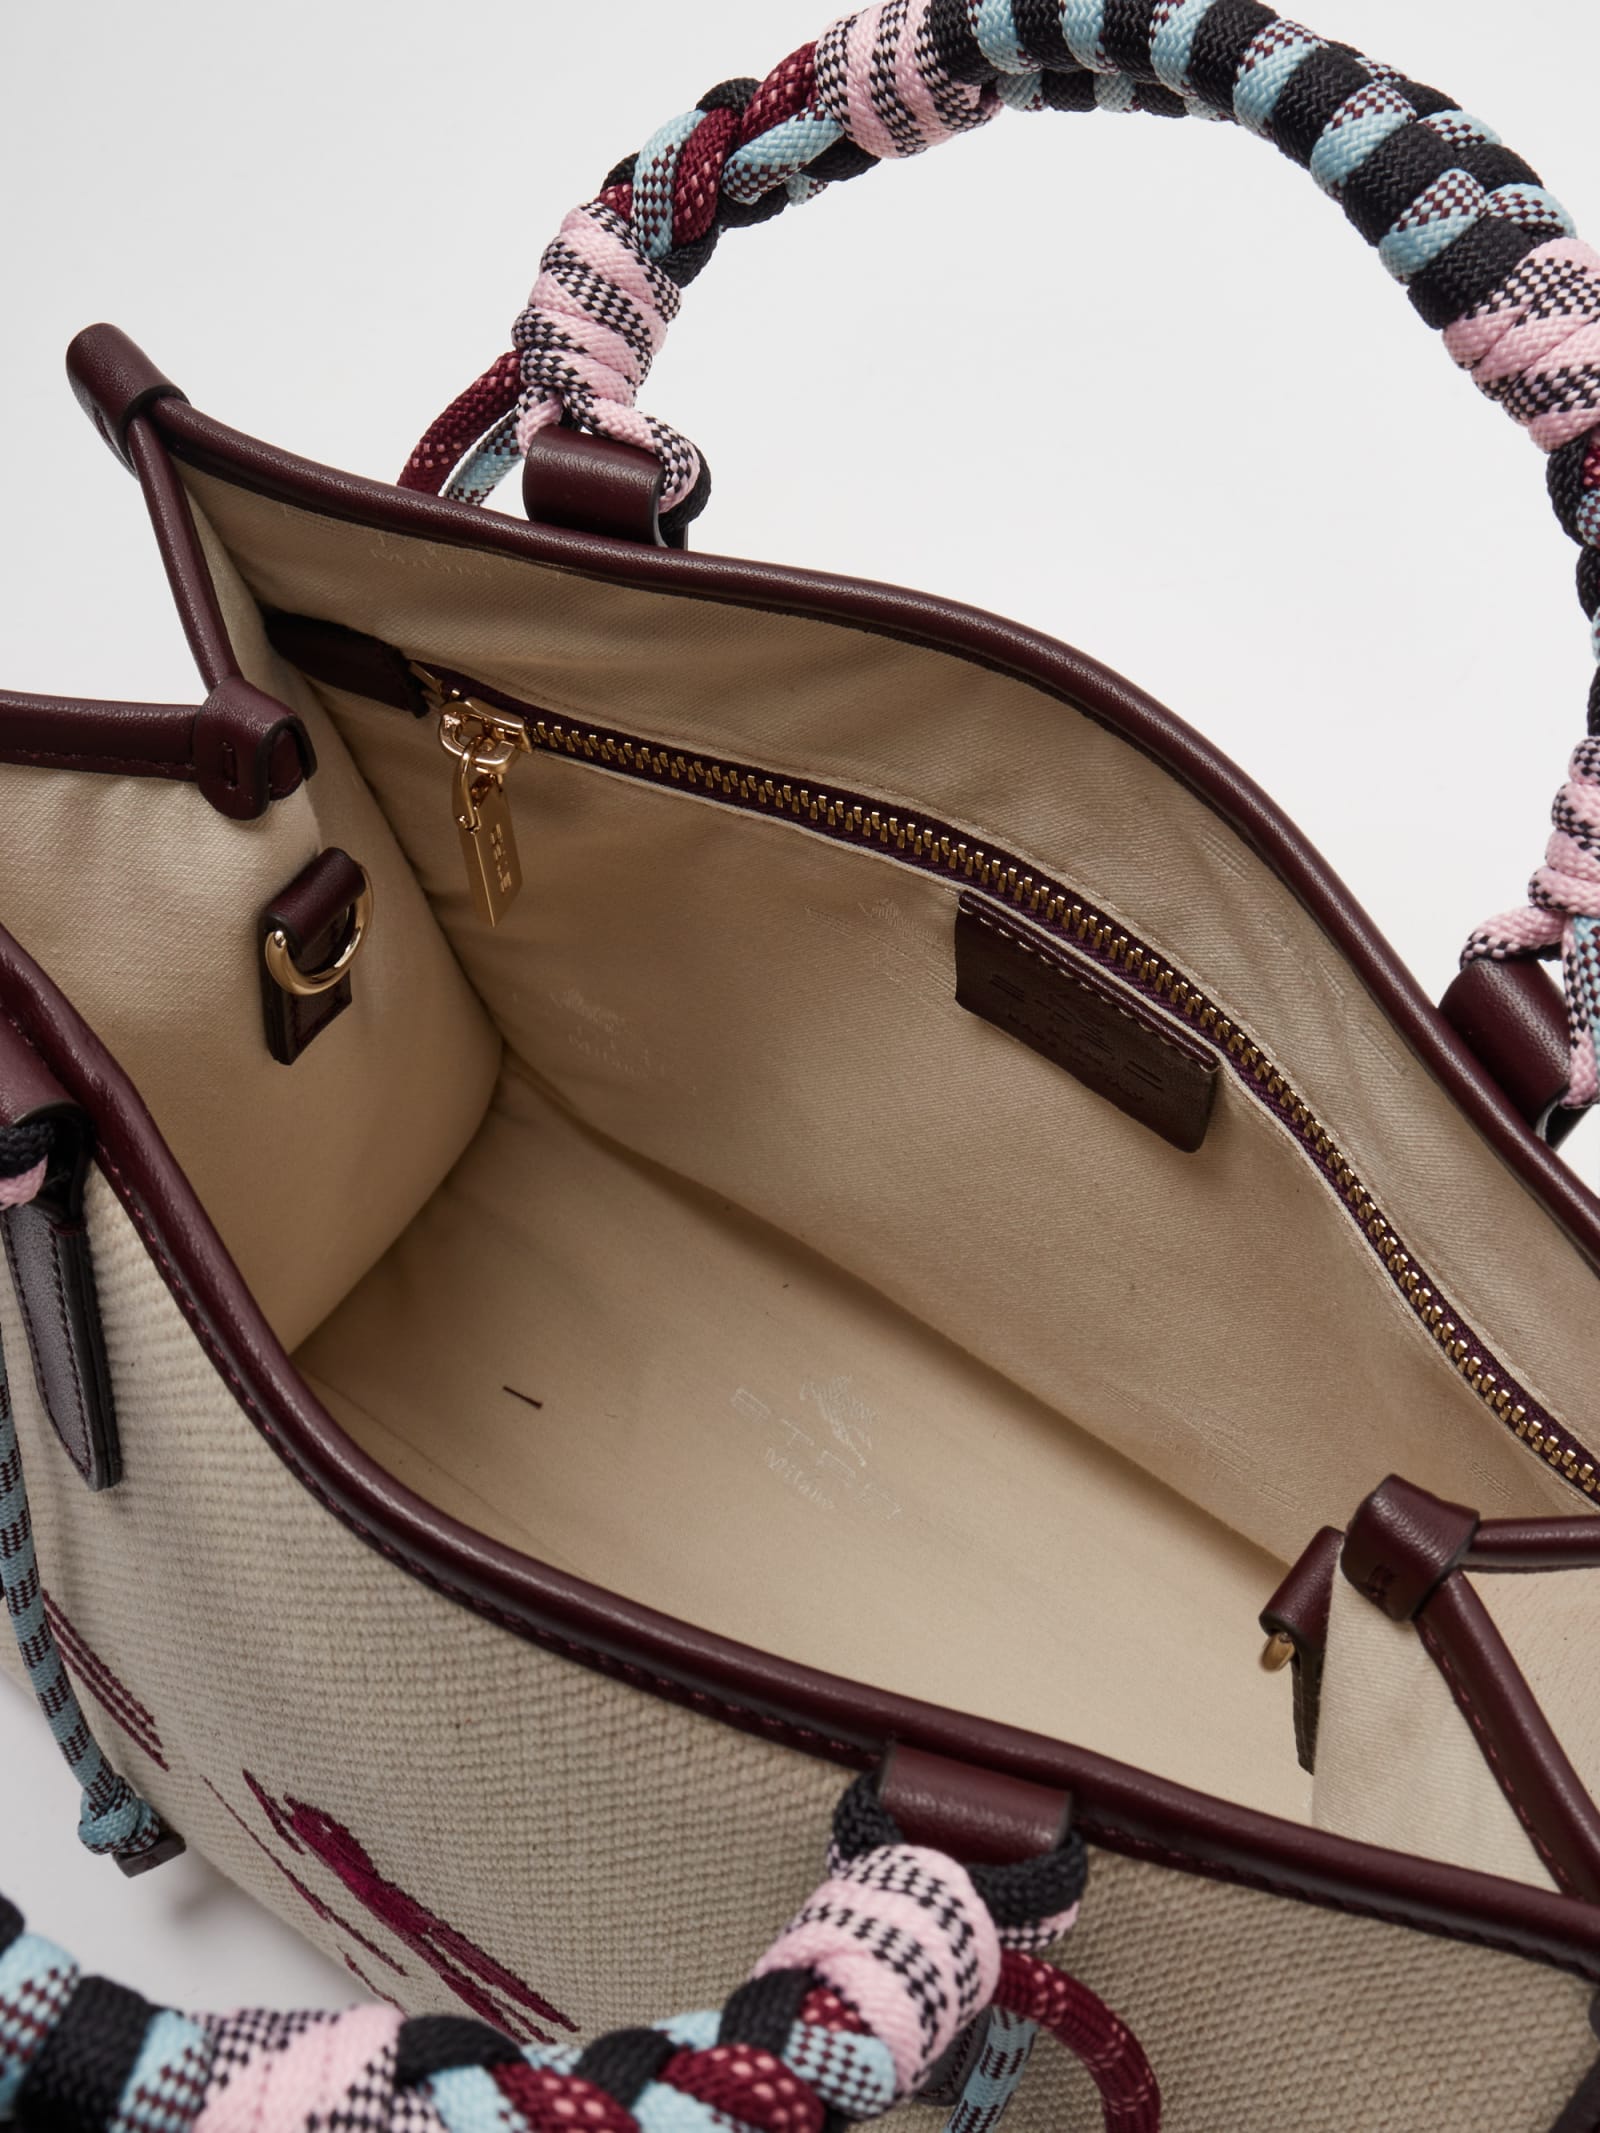 Etro Tote Bag With Embroidery In Nude & Neutrals